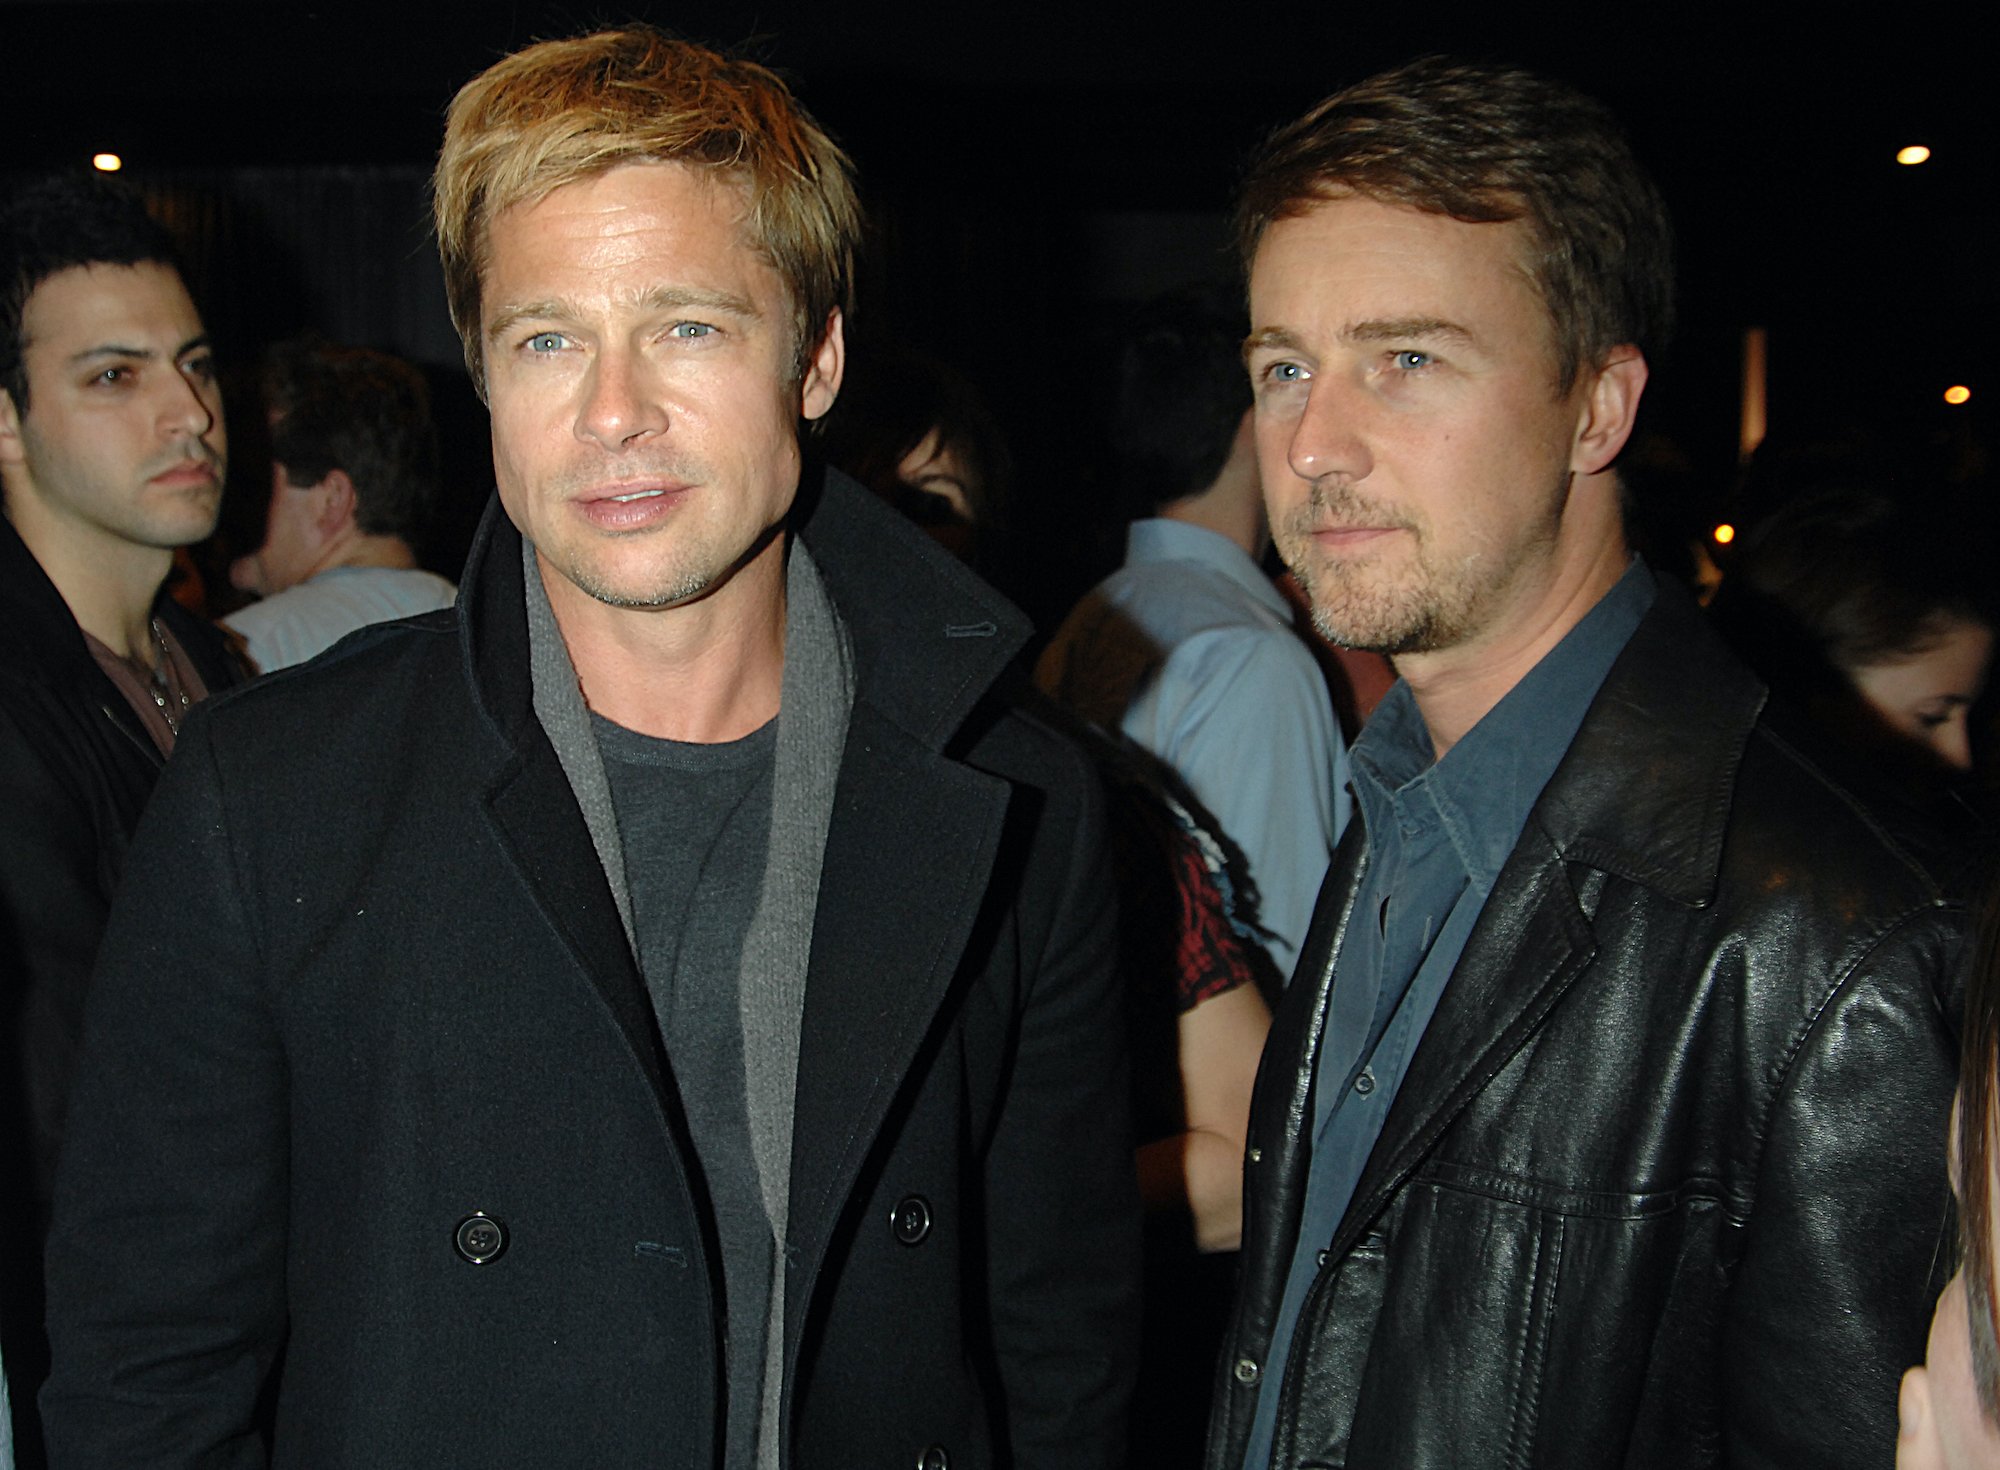 Brad Pitt and Edward Norton, stars of 'Fight Club', standing in a crowd